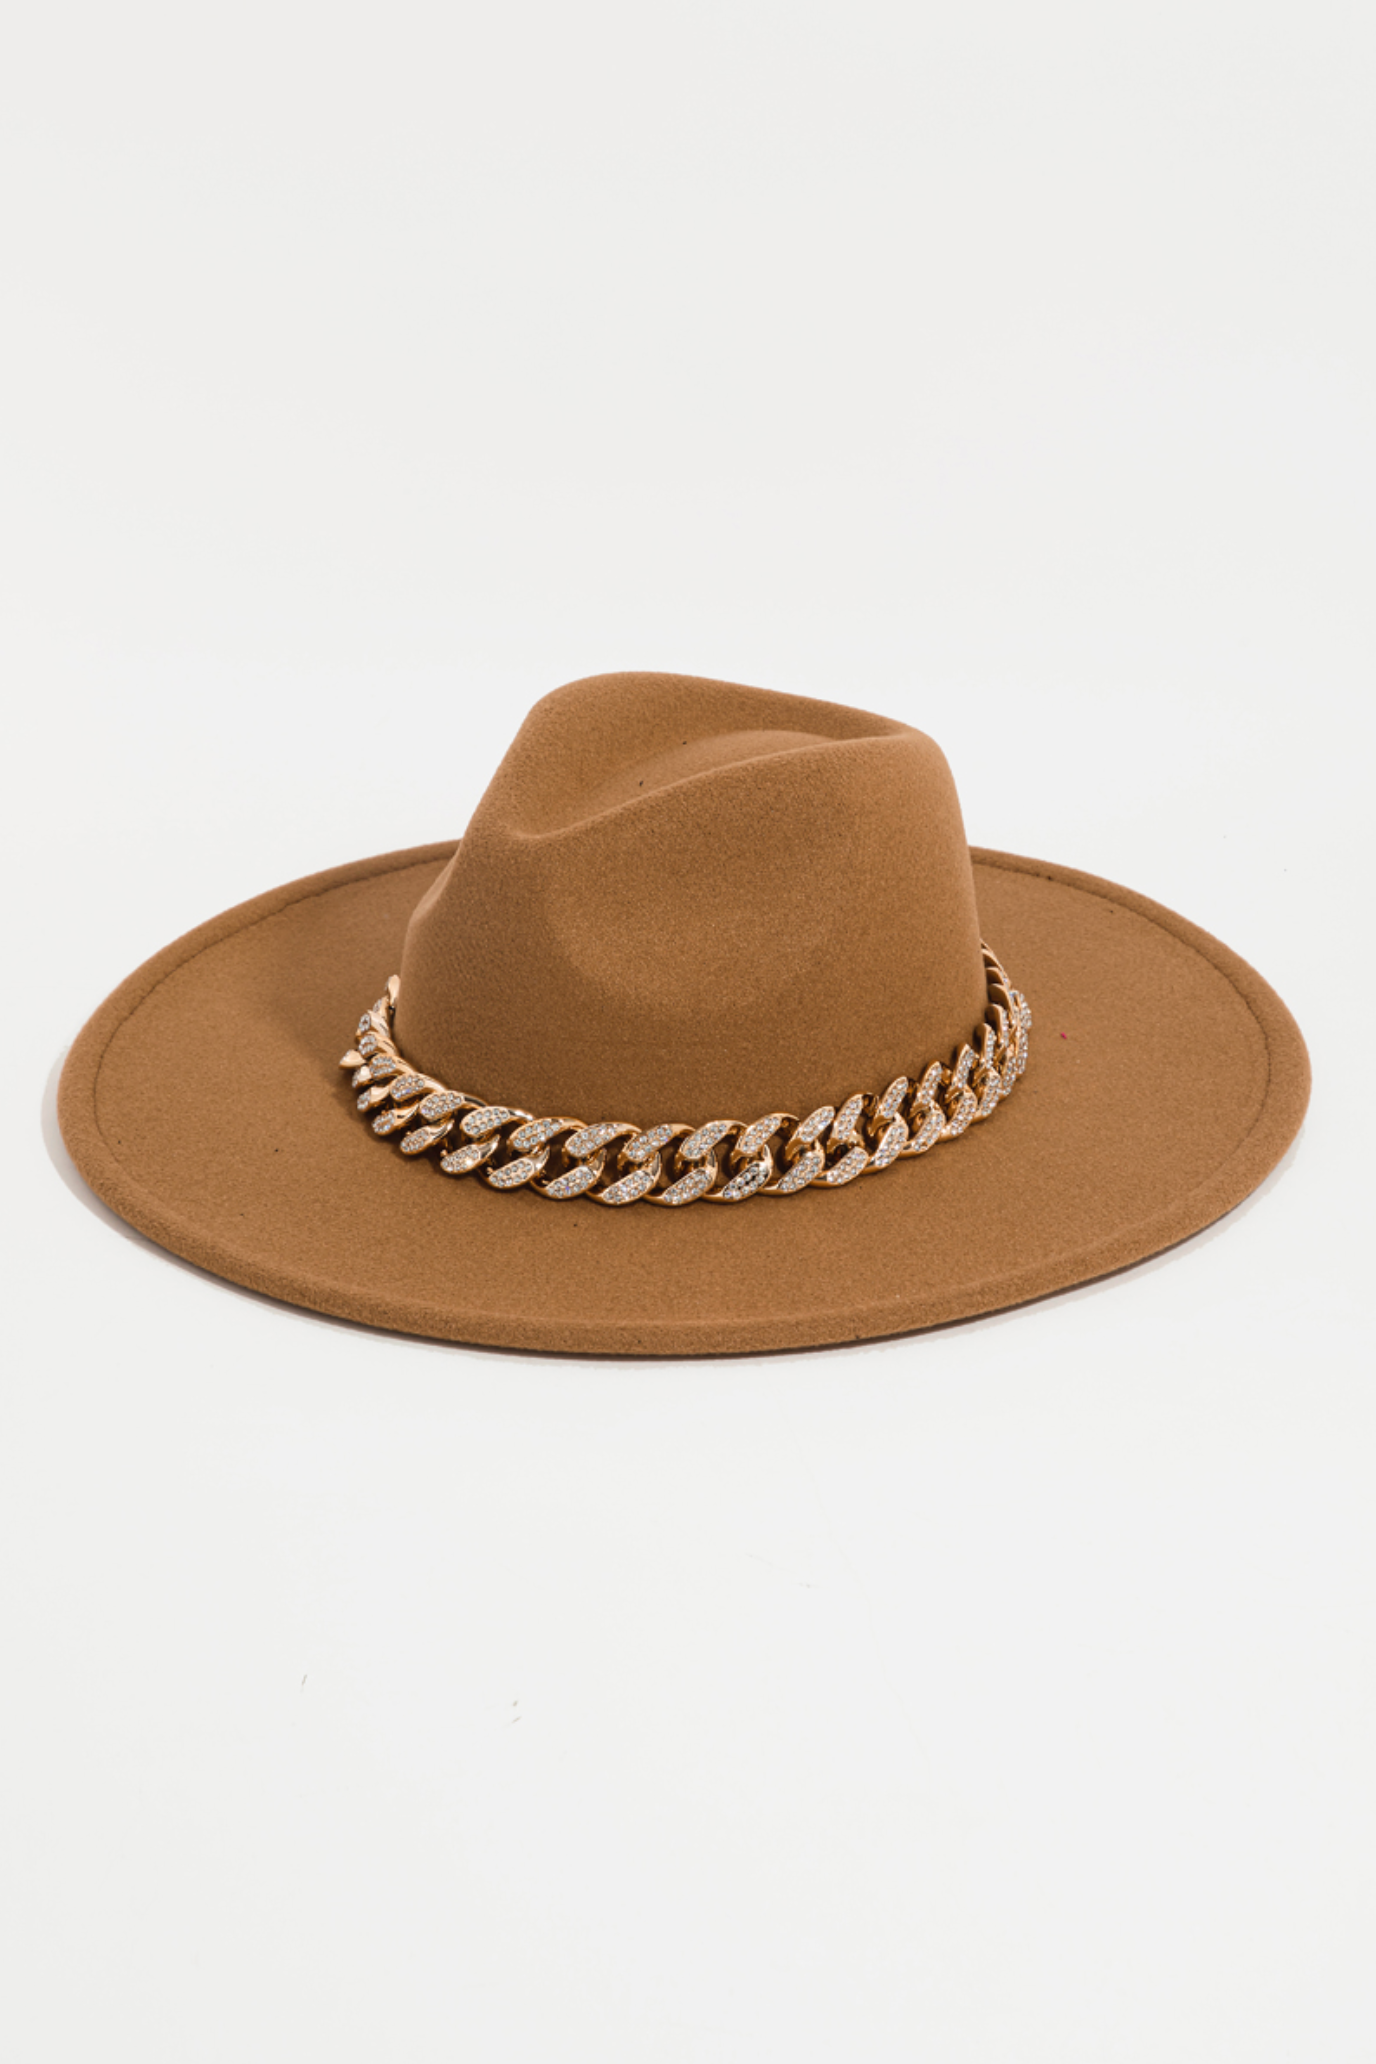 Pave Curb Chain Fedora Hat